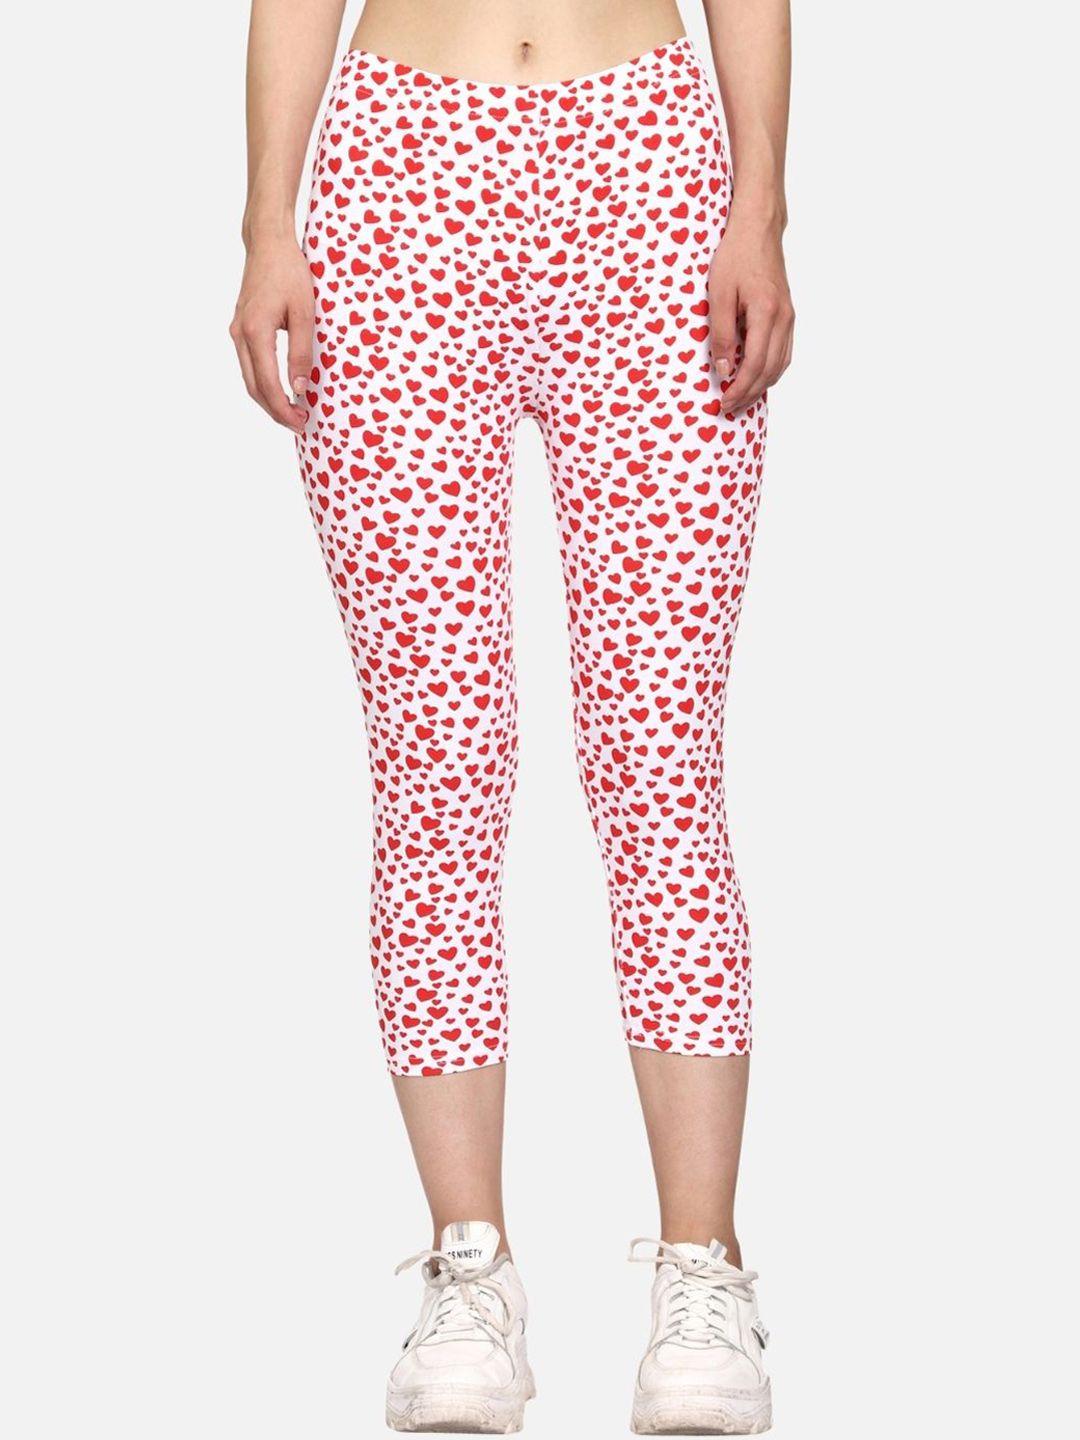 outflits women white & red printed capris